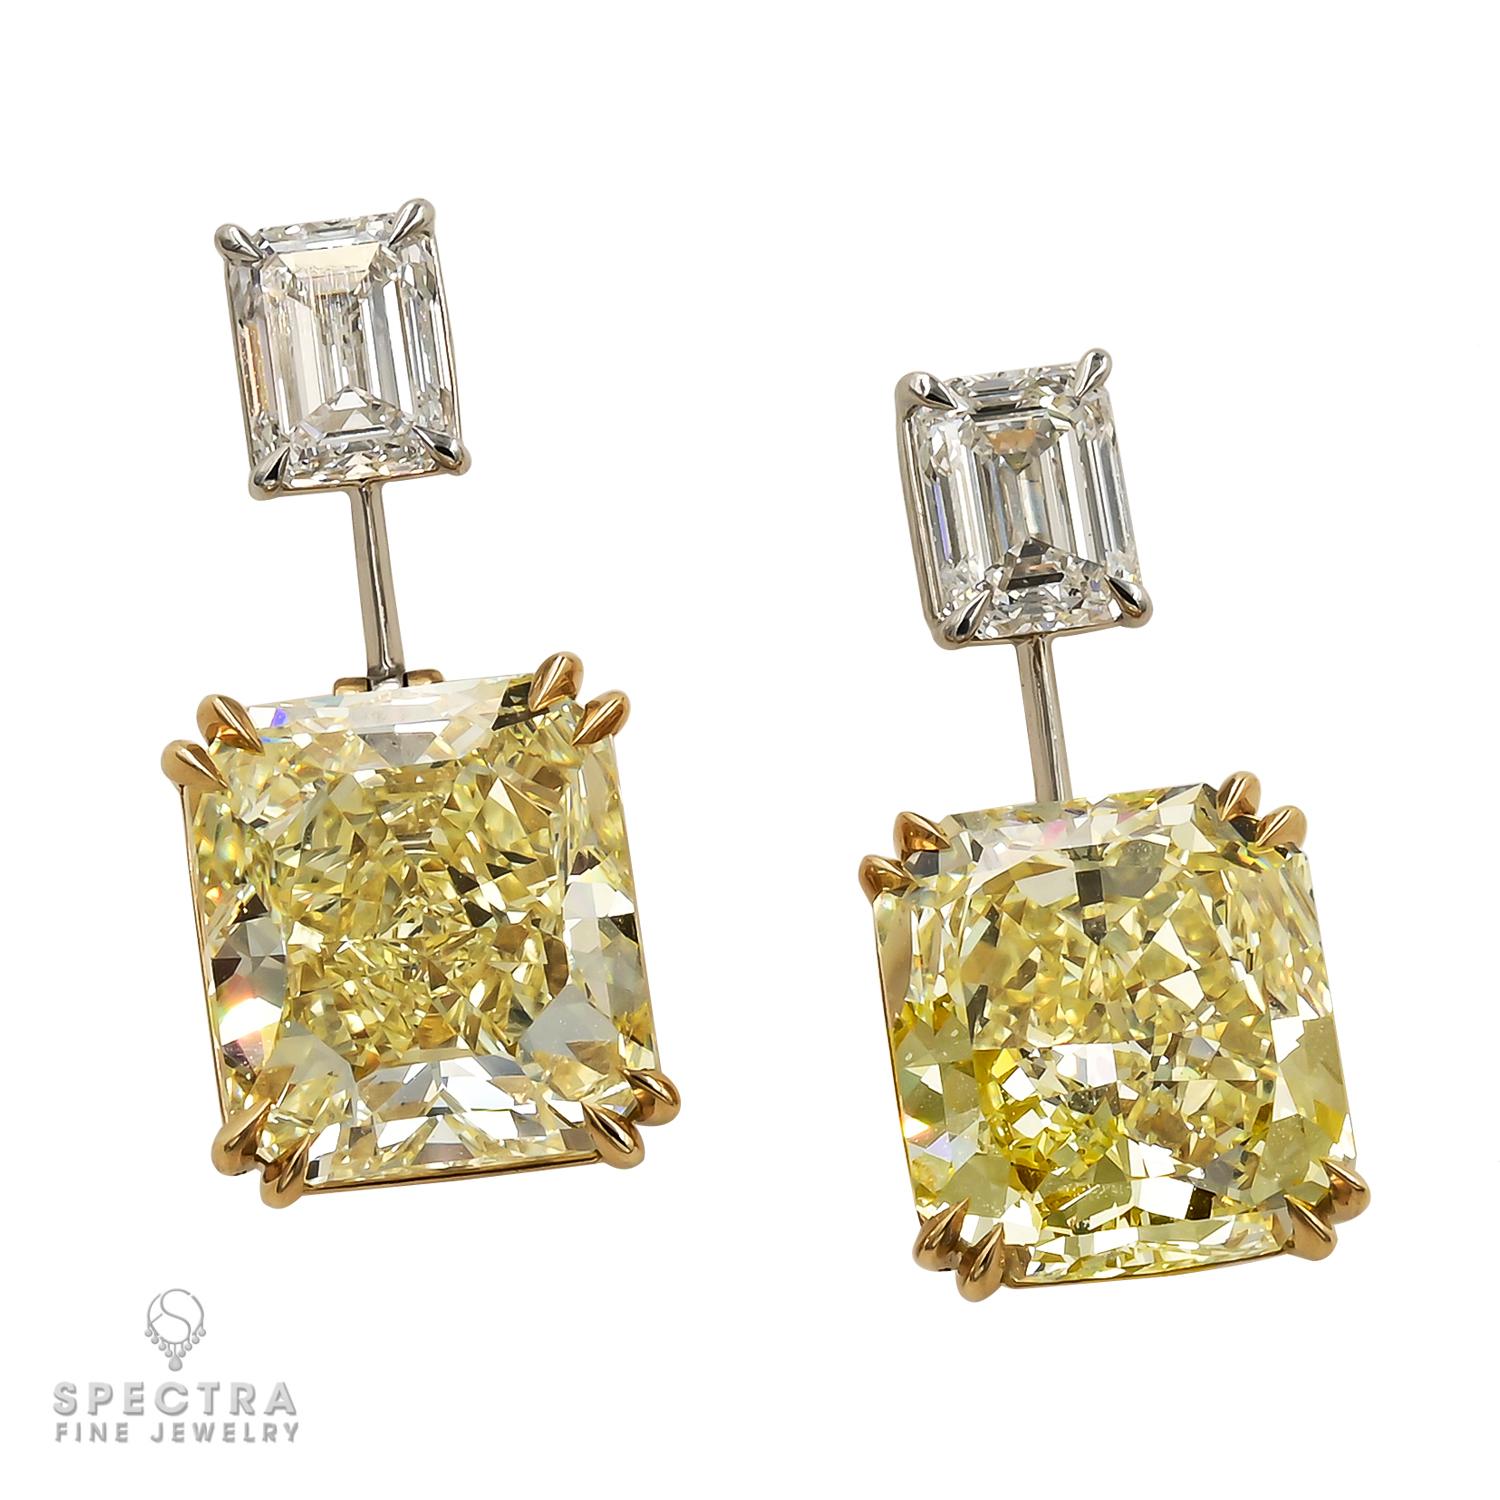 Sparkling with splendor of the sun itself, yellow diamonds are sure to usher happiness and joy into your life. The Contemporary Yellow Radiant Diamond Drop Earrings, made by Spectra Fine Jewelry in 2023, are crafted in 18K yellow gold and platinum